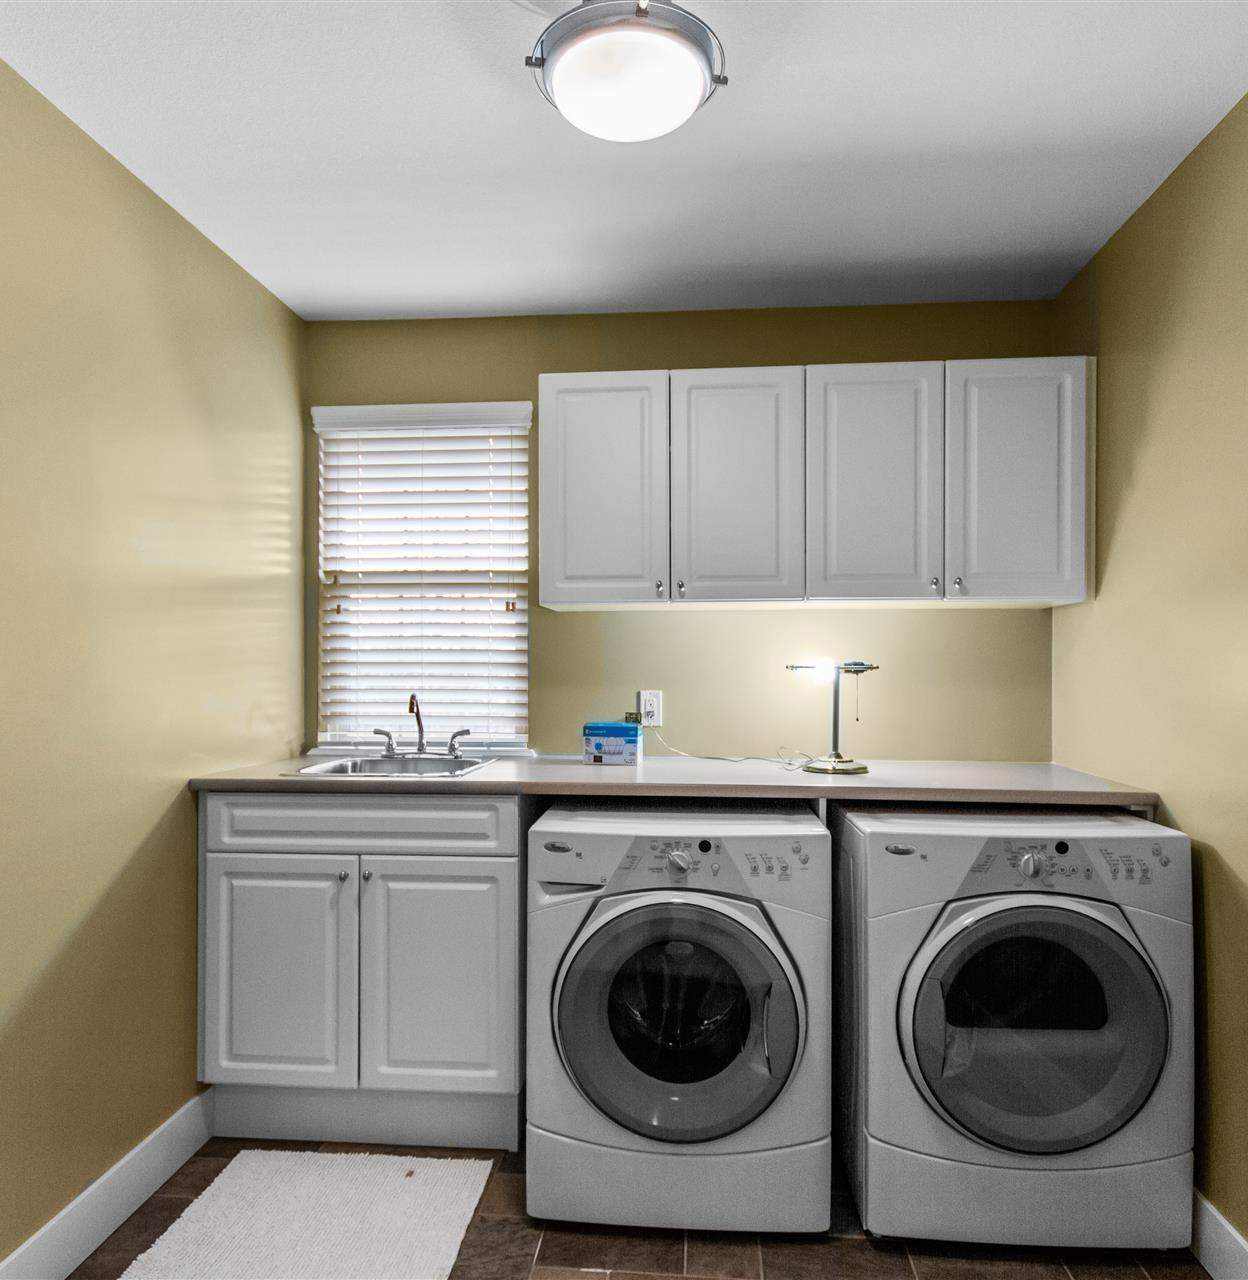 clothes washing area with natural light and independent washer and dryer